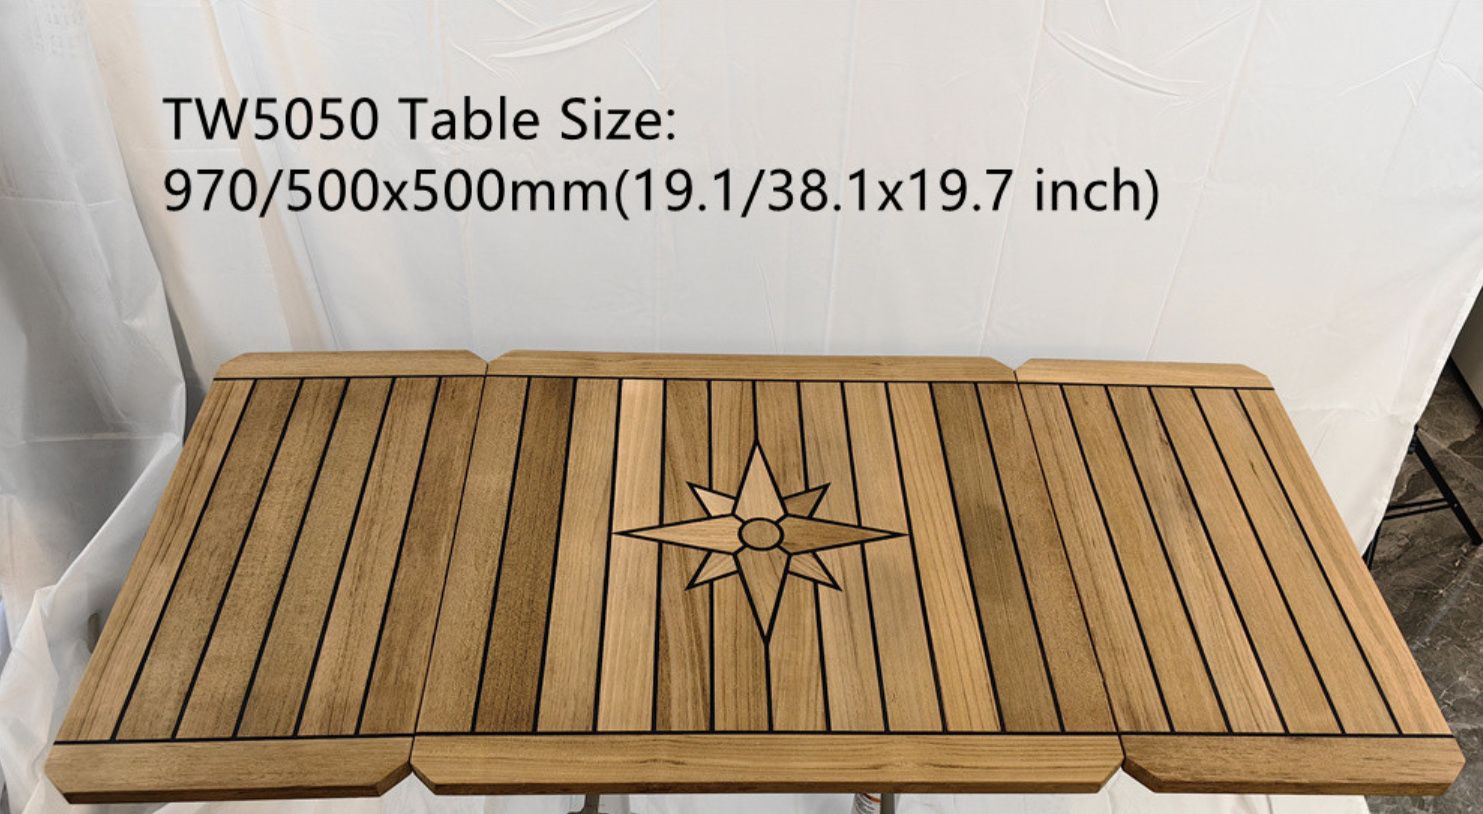 TW5050 Table Only 19.1/38.1x19.7 Inch